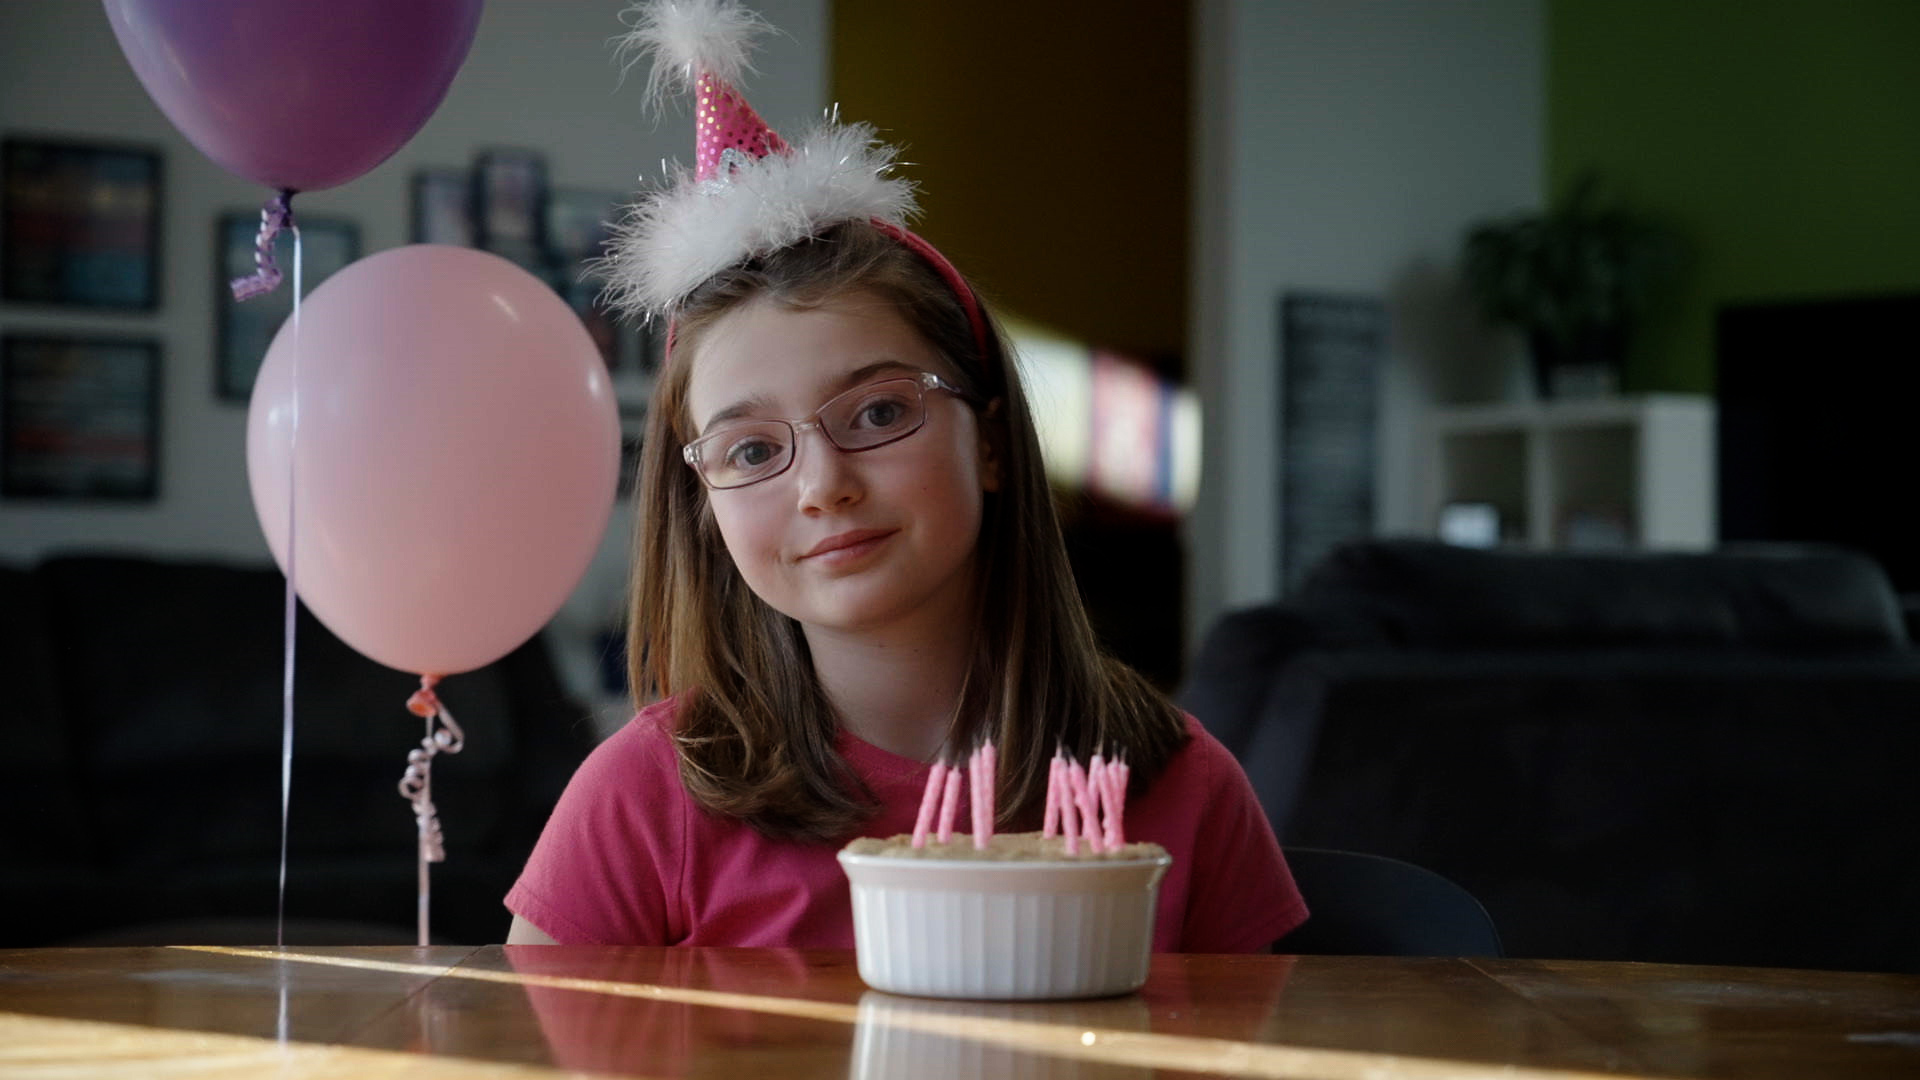 Ellie sits at her kitchen table after her family sang the "Happy Birthday" song to her. Her cake is in front of her.